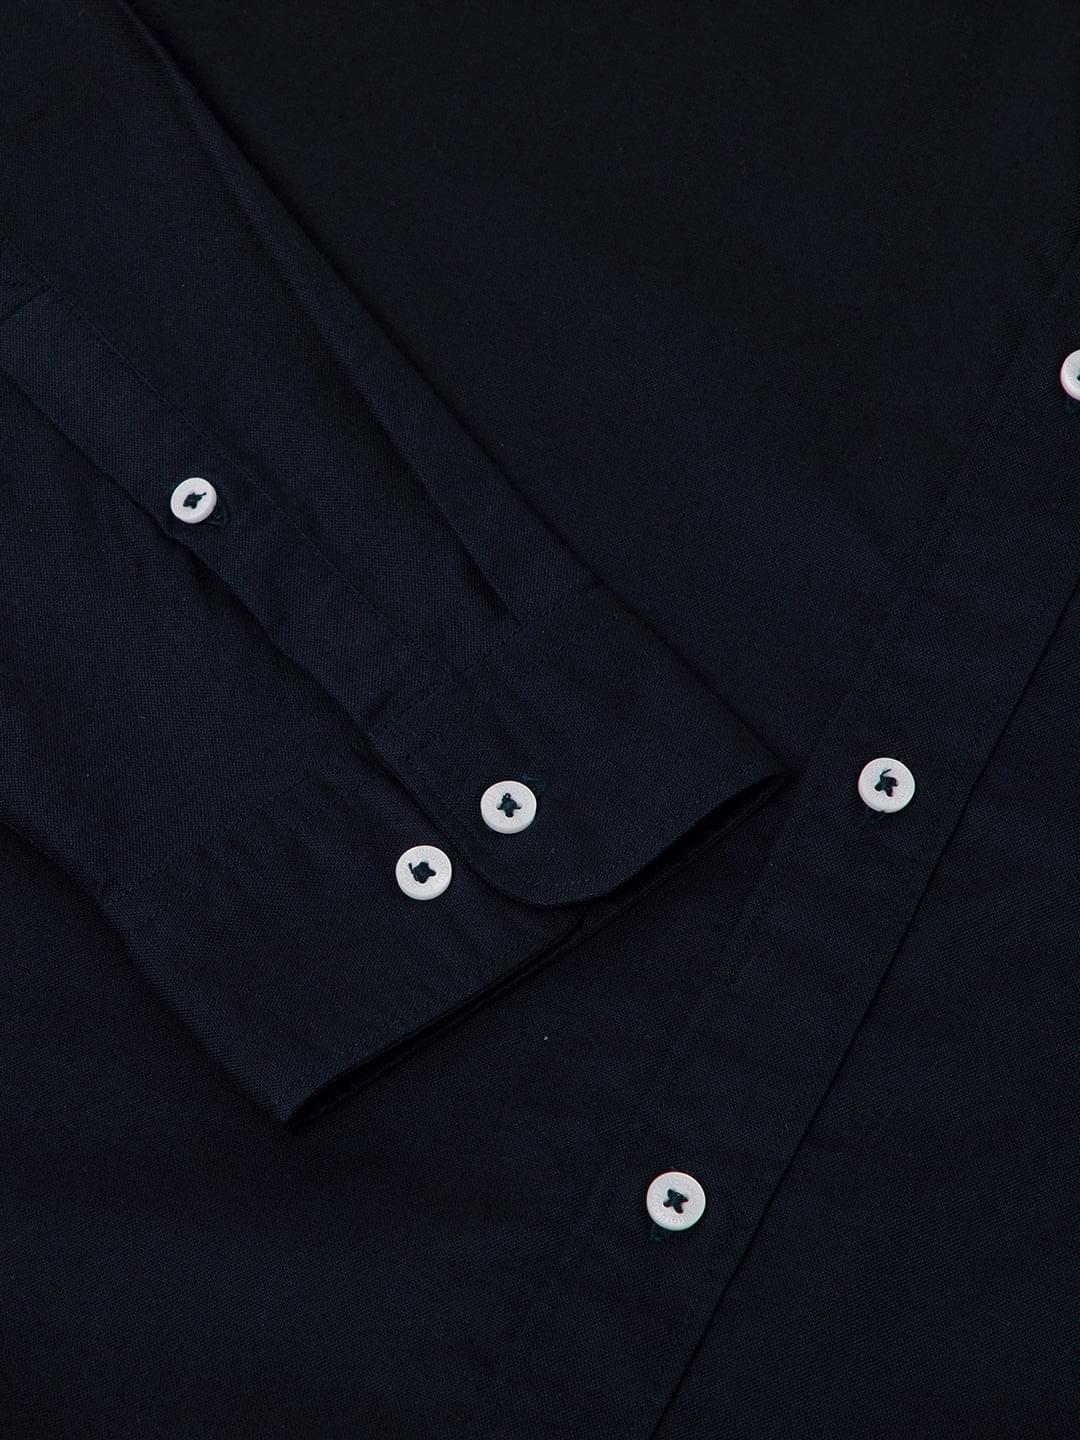 Casual Oxford Shirt in Navy- Comfort Fit